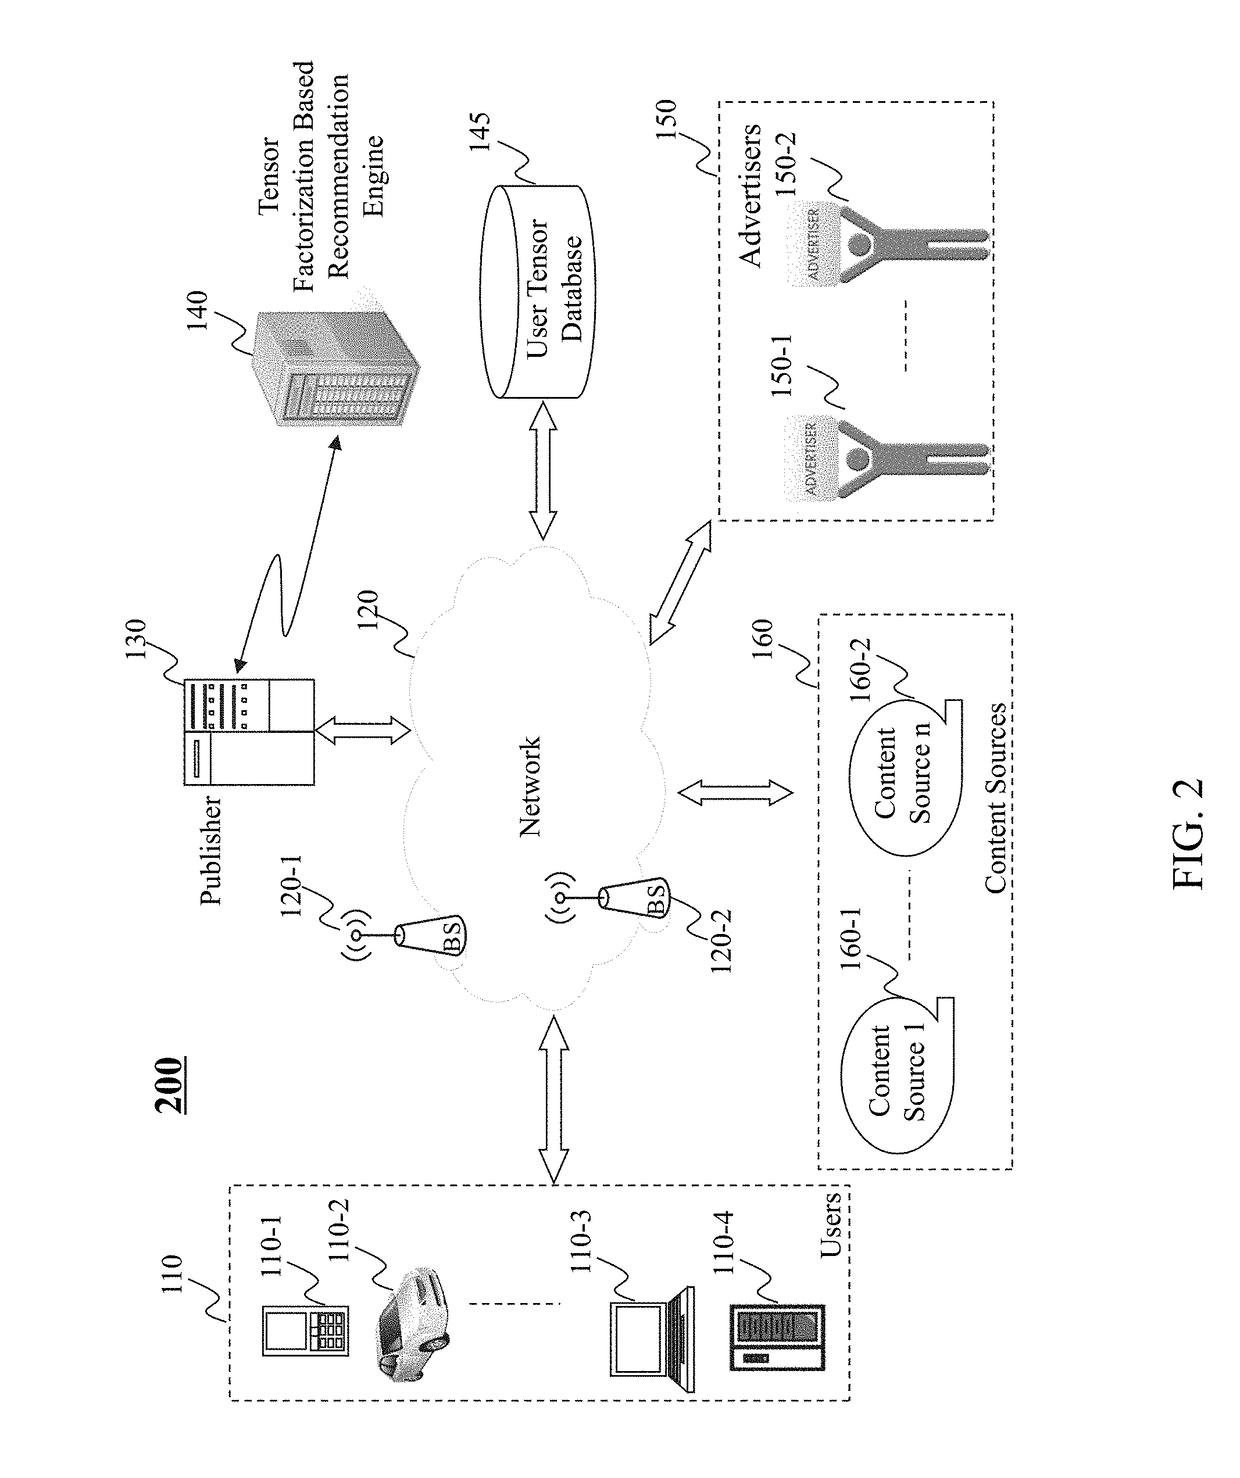 Method and system for recommending content items to a user based on tensor factorization